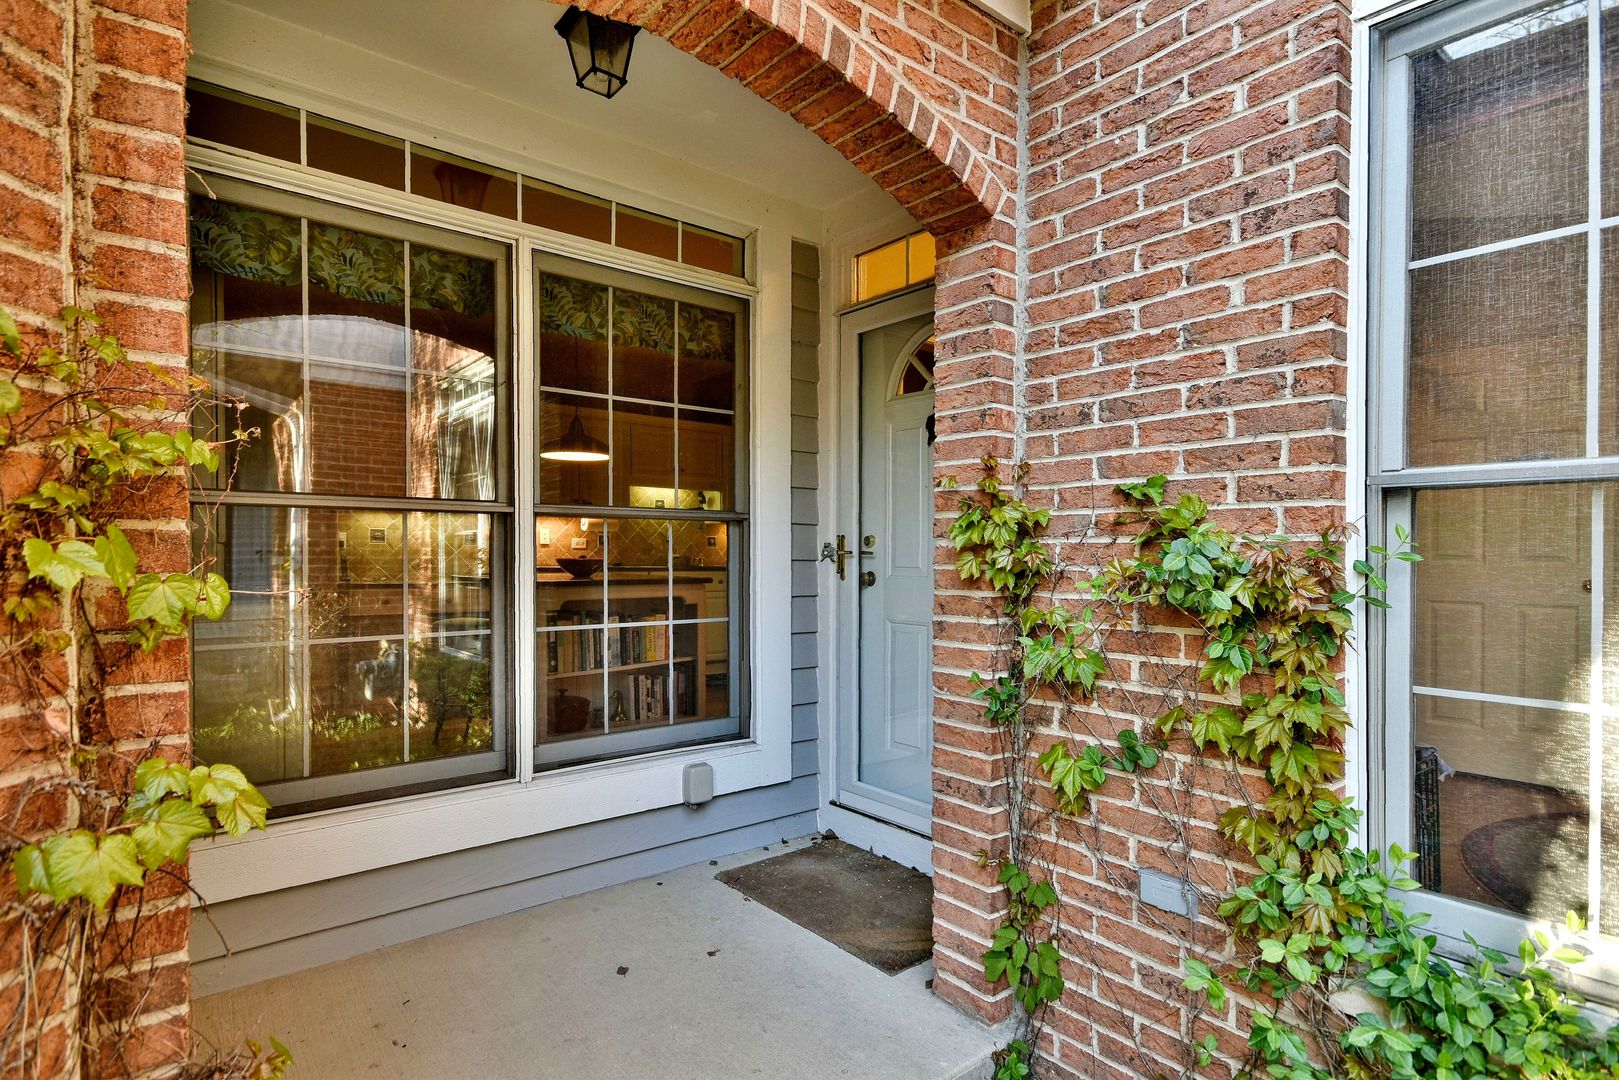 a view of front door of house with potted plant windows